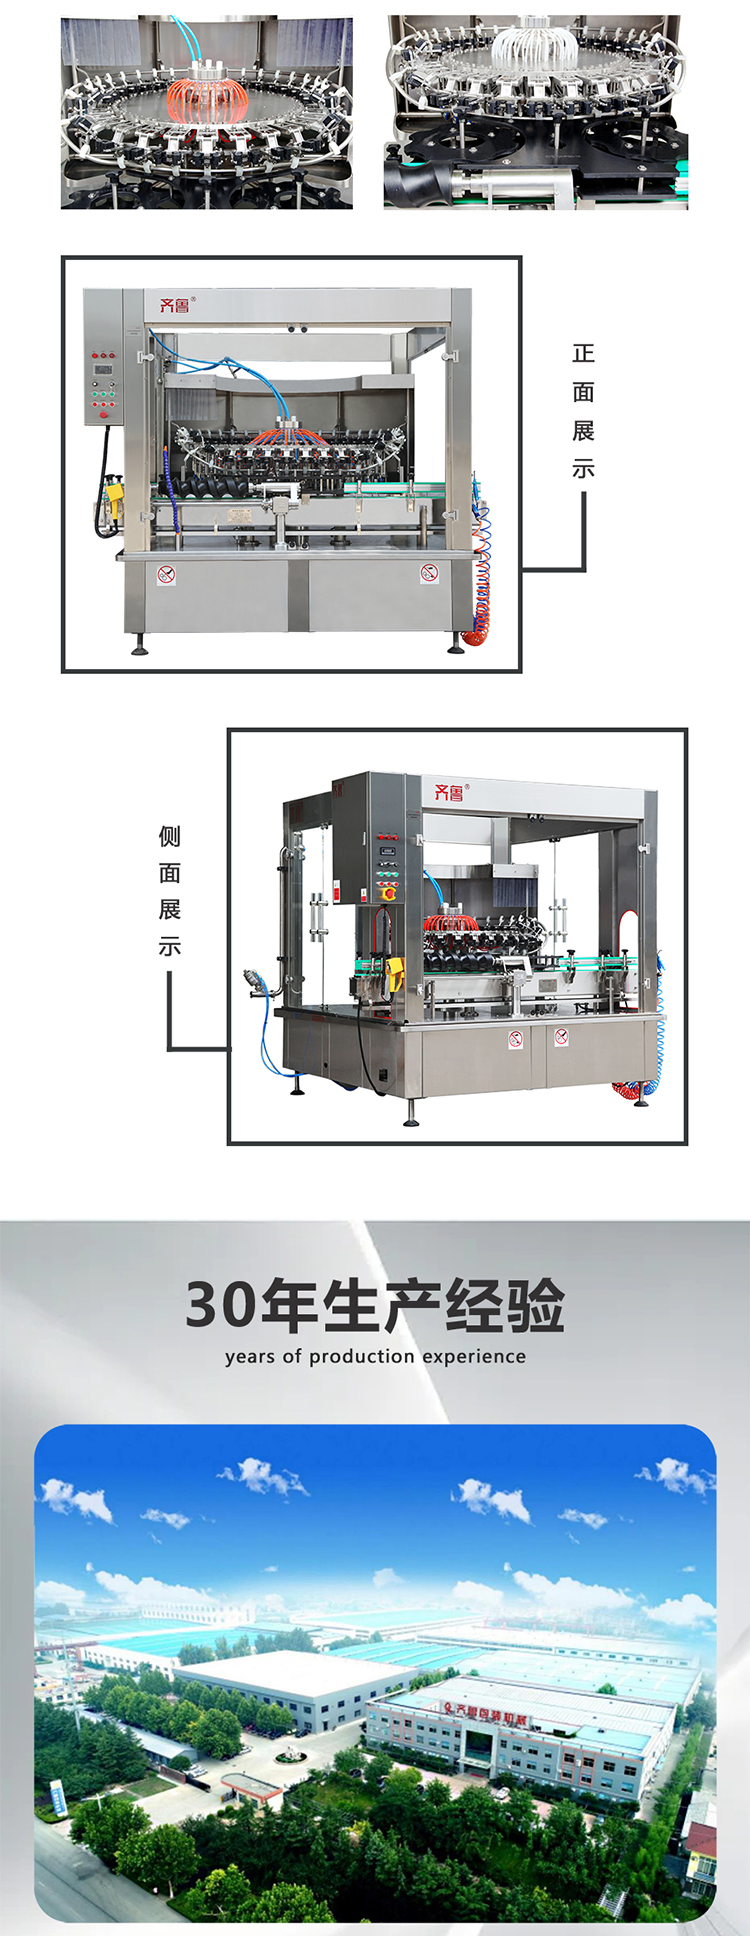 Qilu Packaging Machinery Fully Automatic Bottle Washing Machine Flipping Bottle Washing Machine Glass Bottle Cleaning Machine with Excellent Removal of Impurities